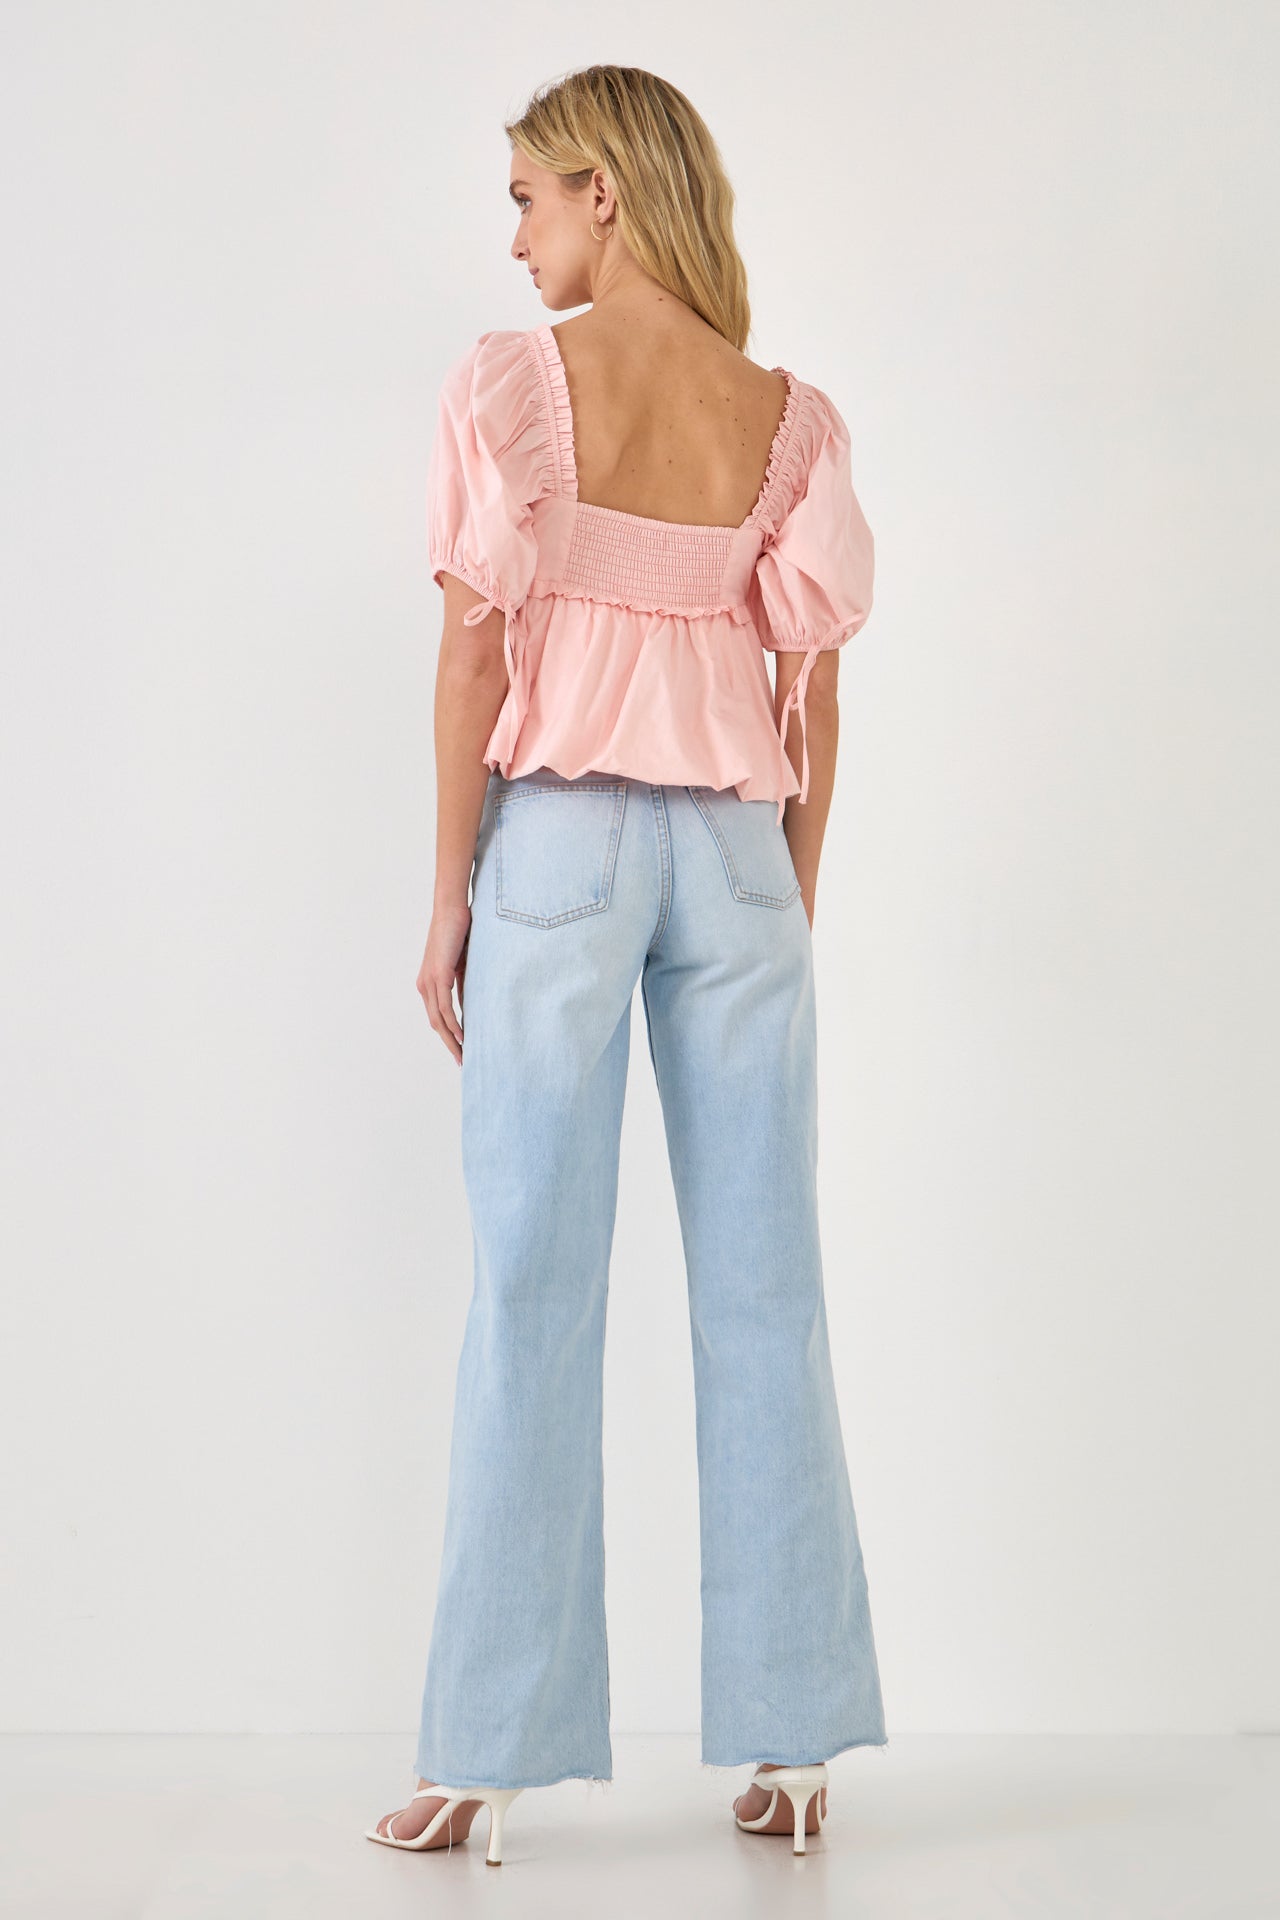 ENDLESS ROSE - Blouson Baby Doll Top - TOPS available at Objectrare